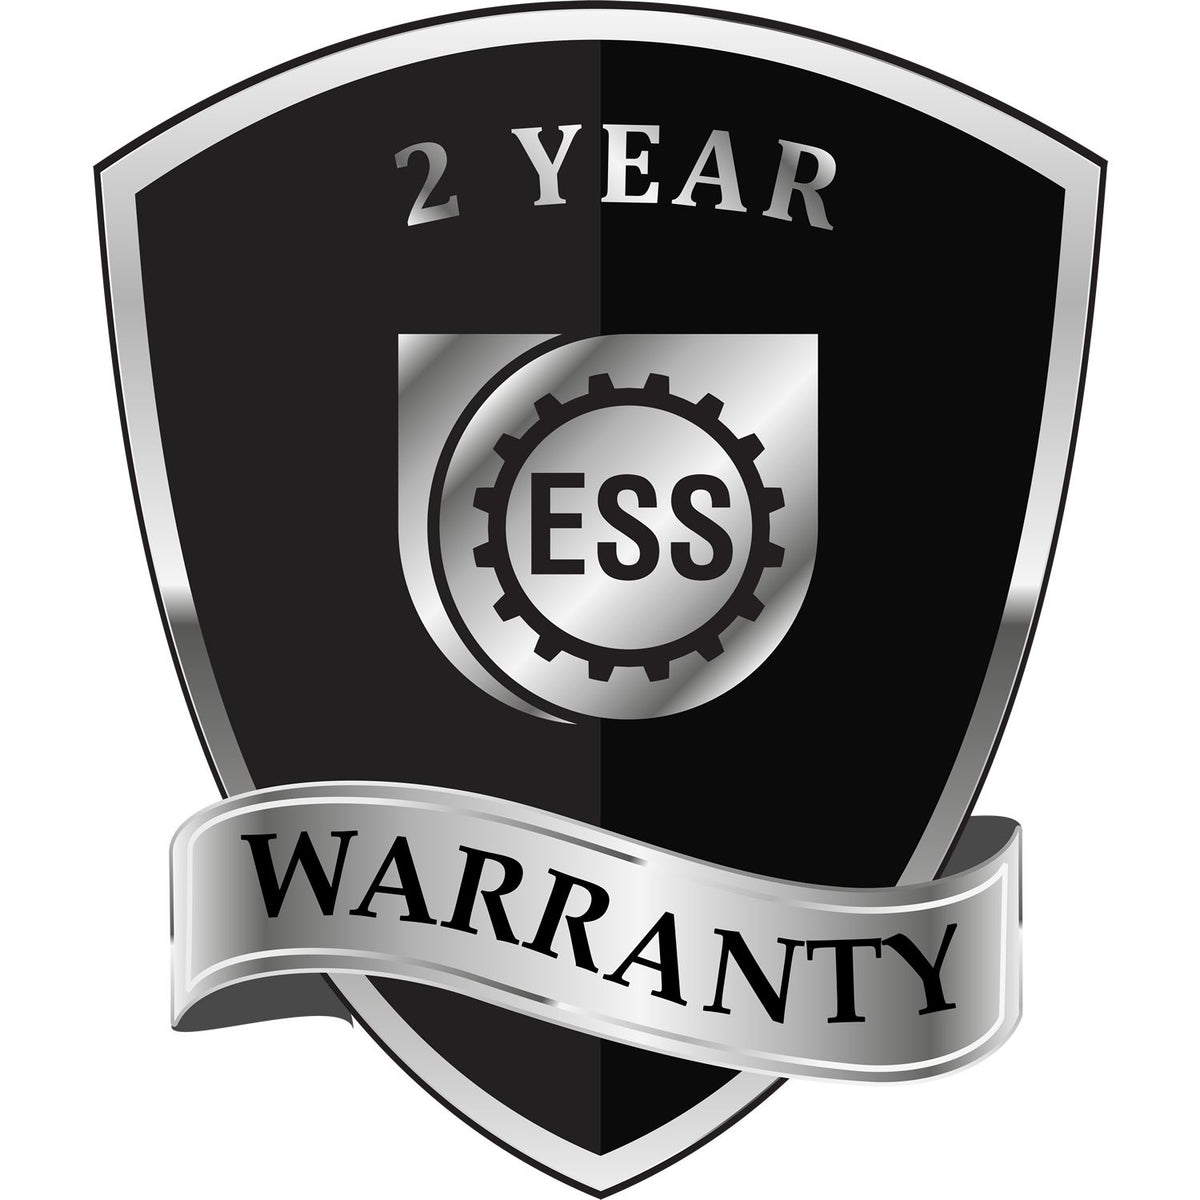 A badge or emblem showing a warranty icon for the Heavy Duty Cast Iron Maryland Land Surveyor Seal Embosser